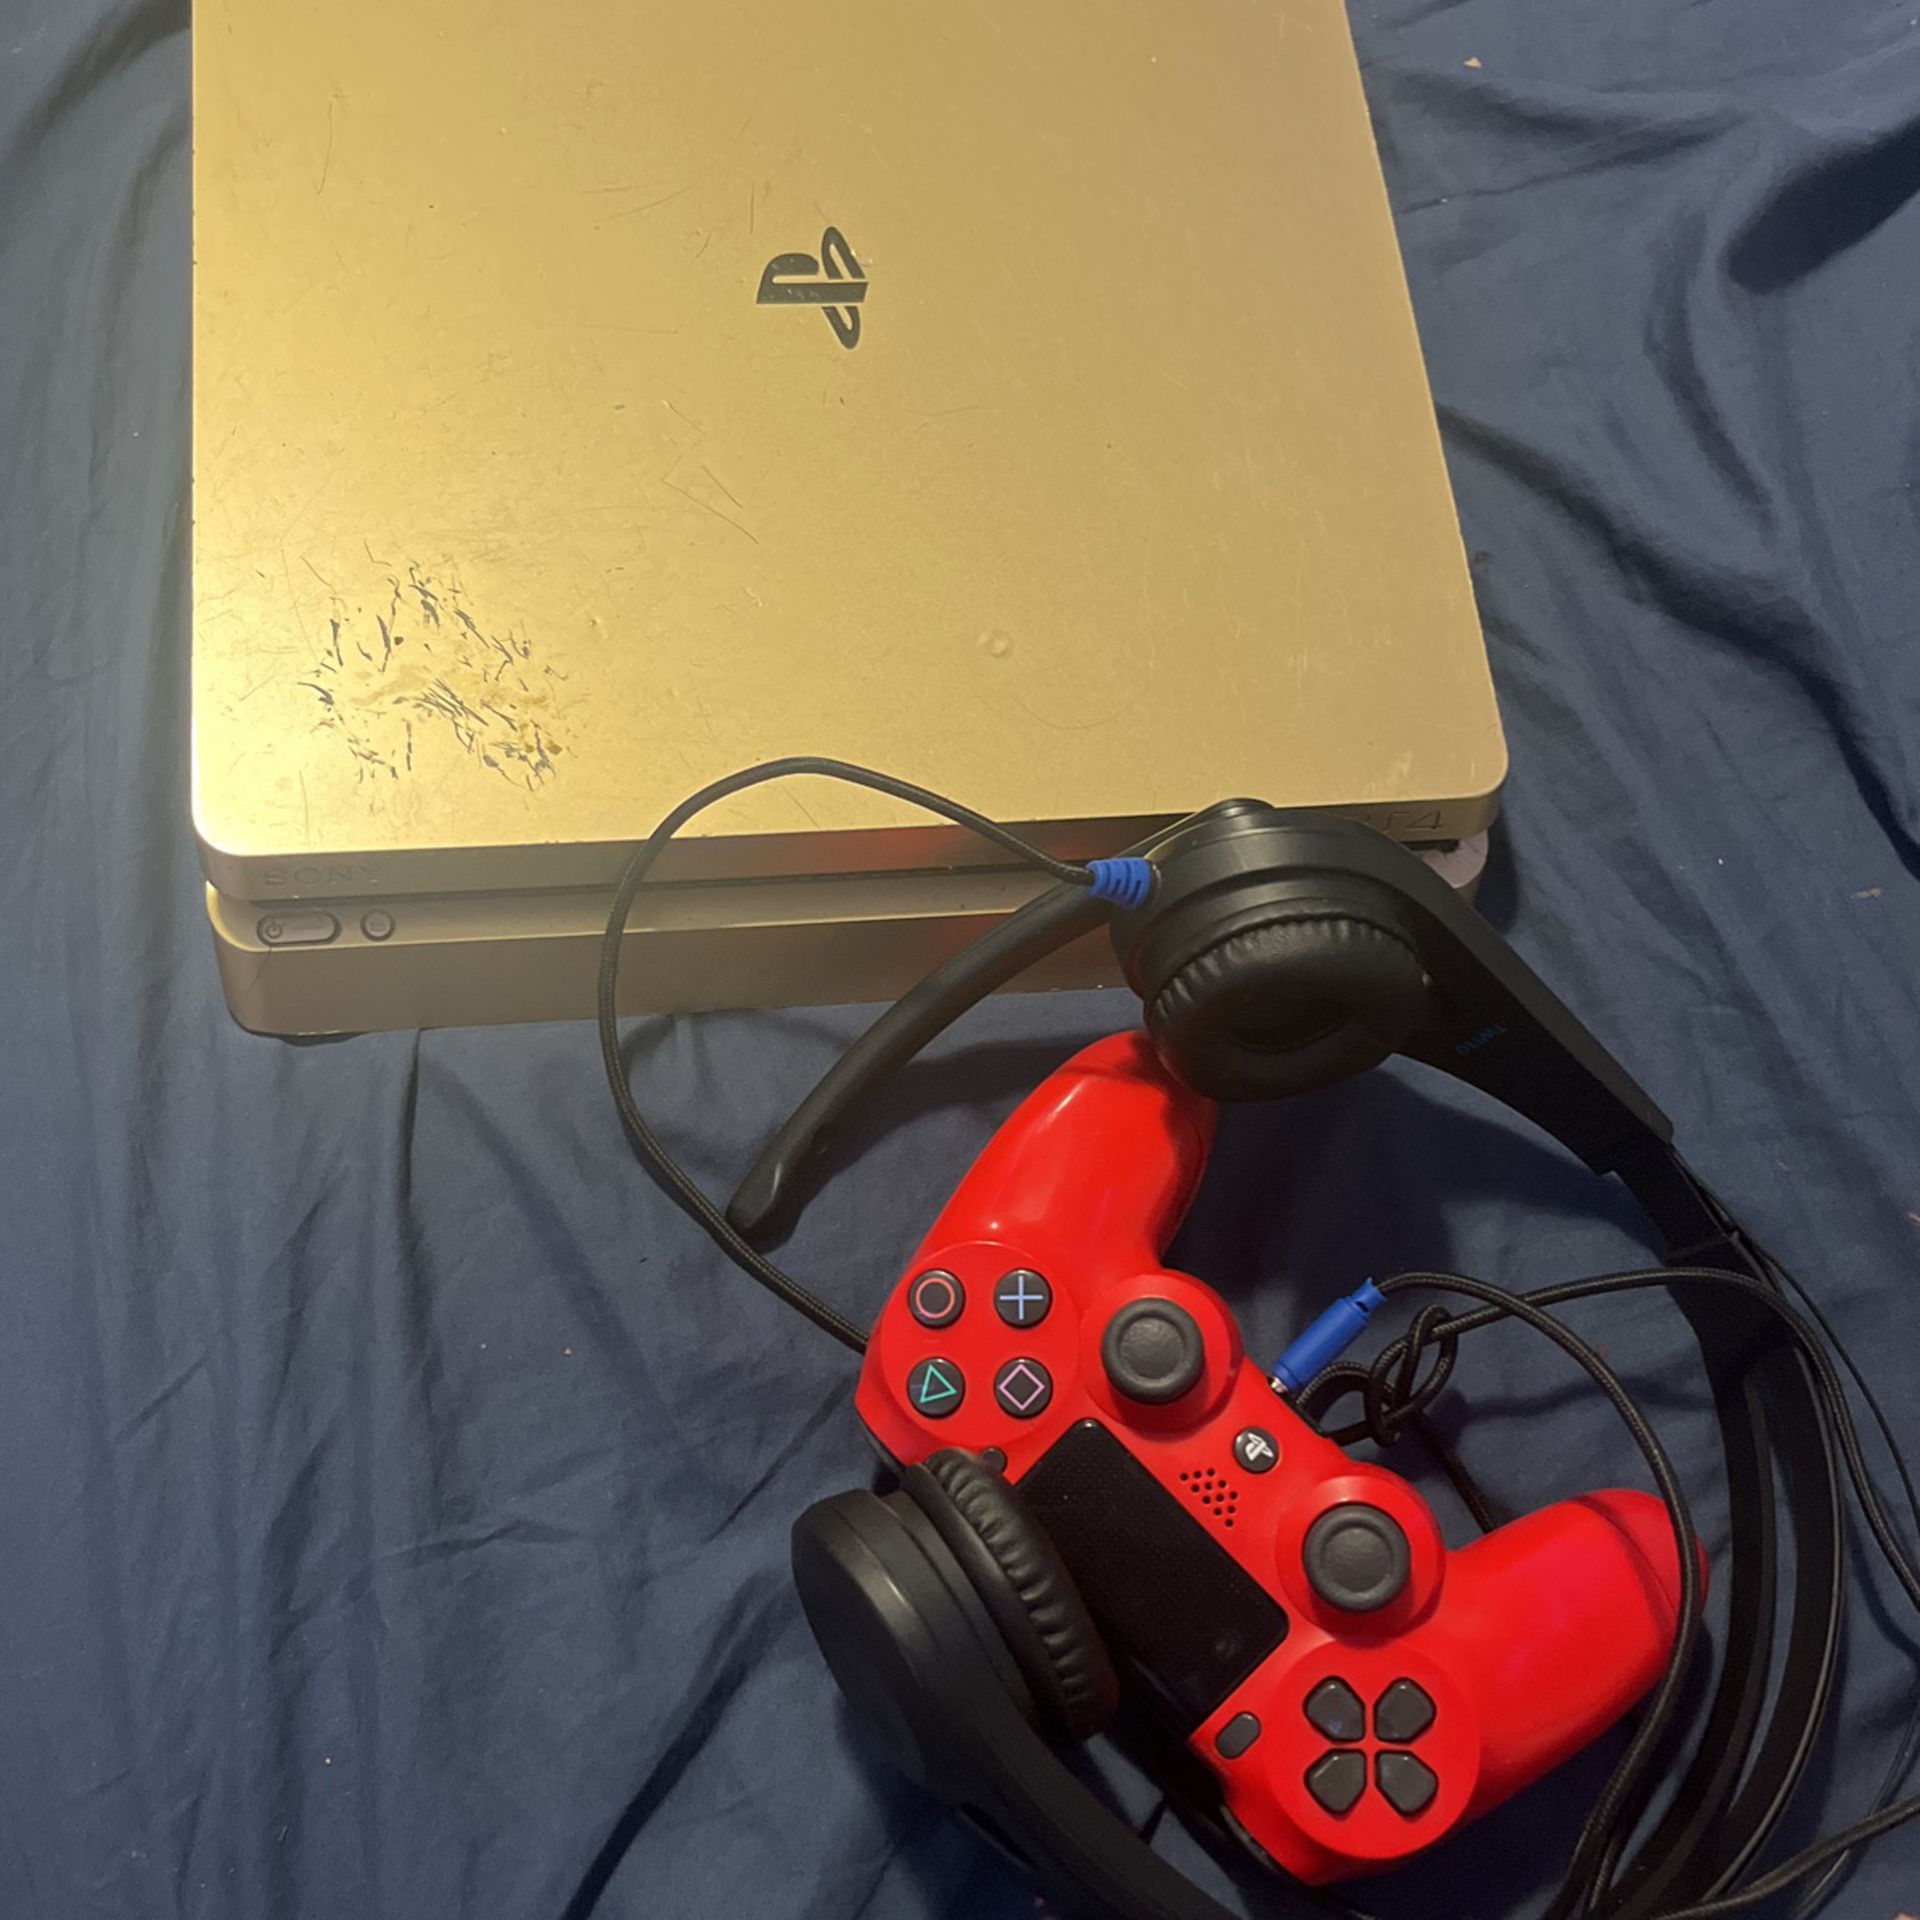 Ps4 Gold Limited Edition Comes With 4 Games And Mic 